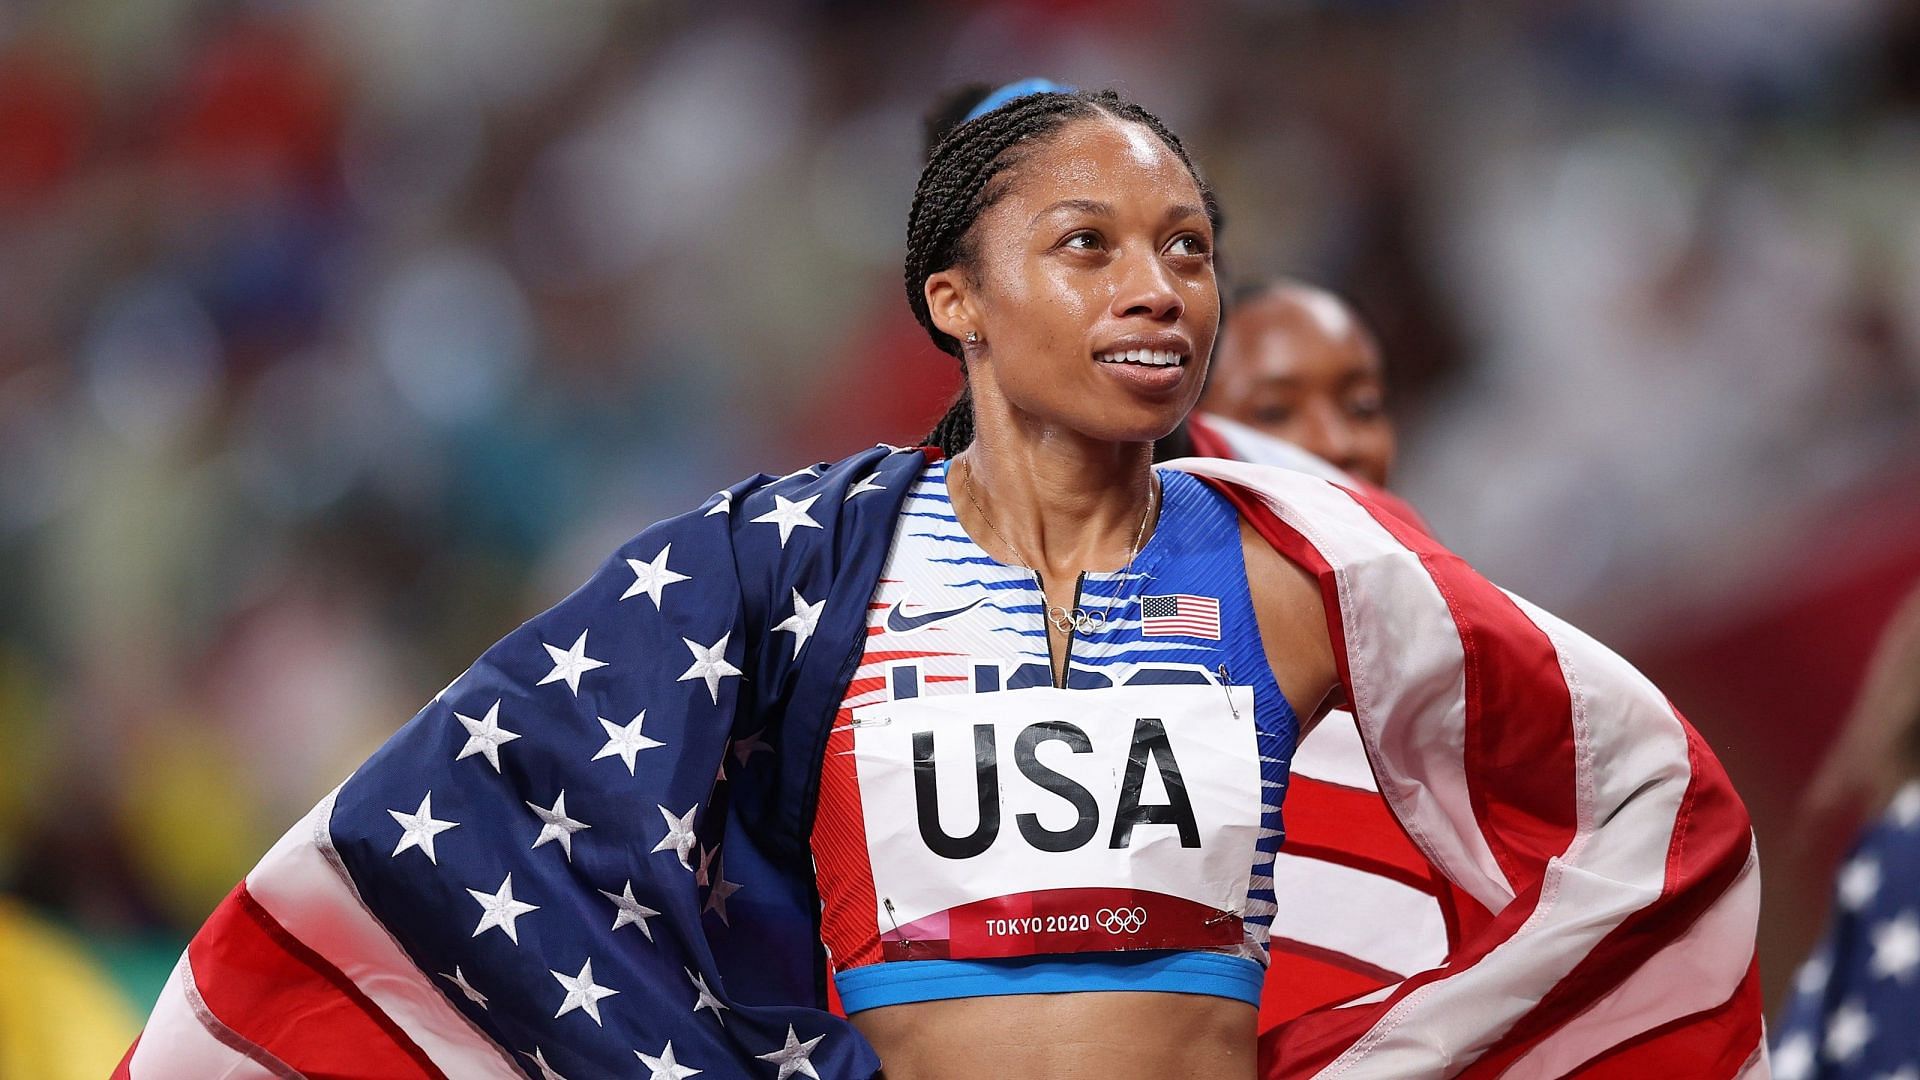 Allyson Felix at the 2020 Summer Olympics held at Tokyo in 2021 (Image via Olympics)